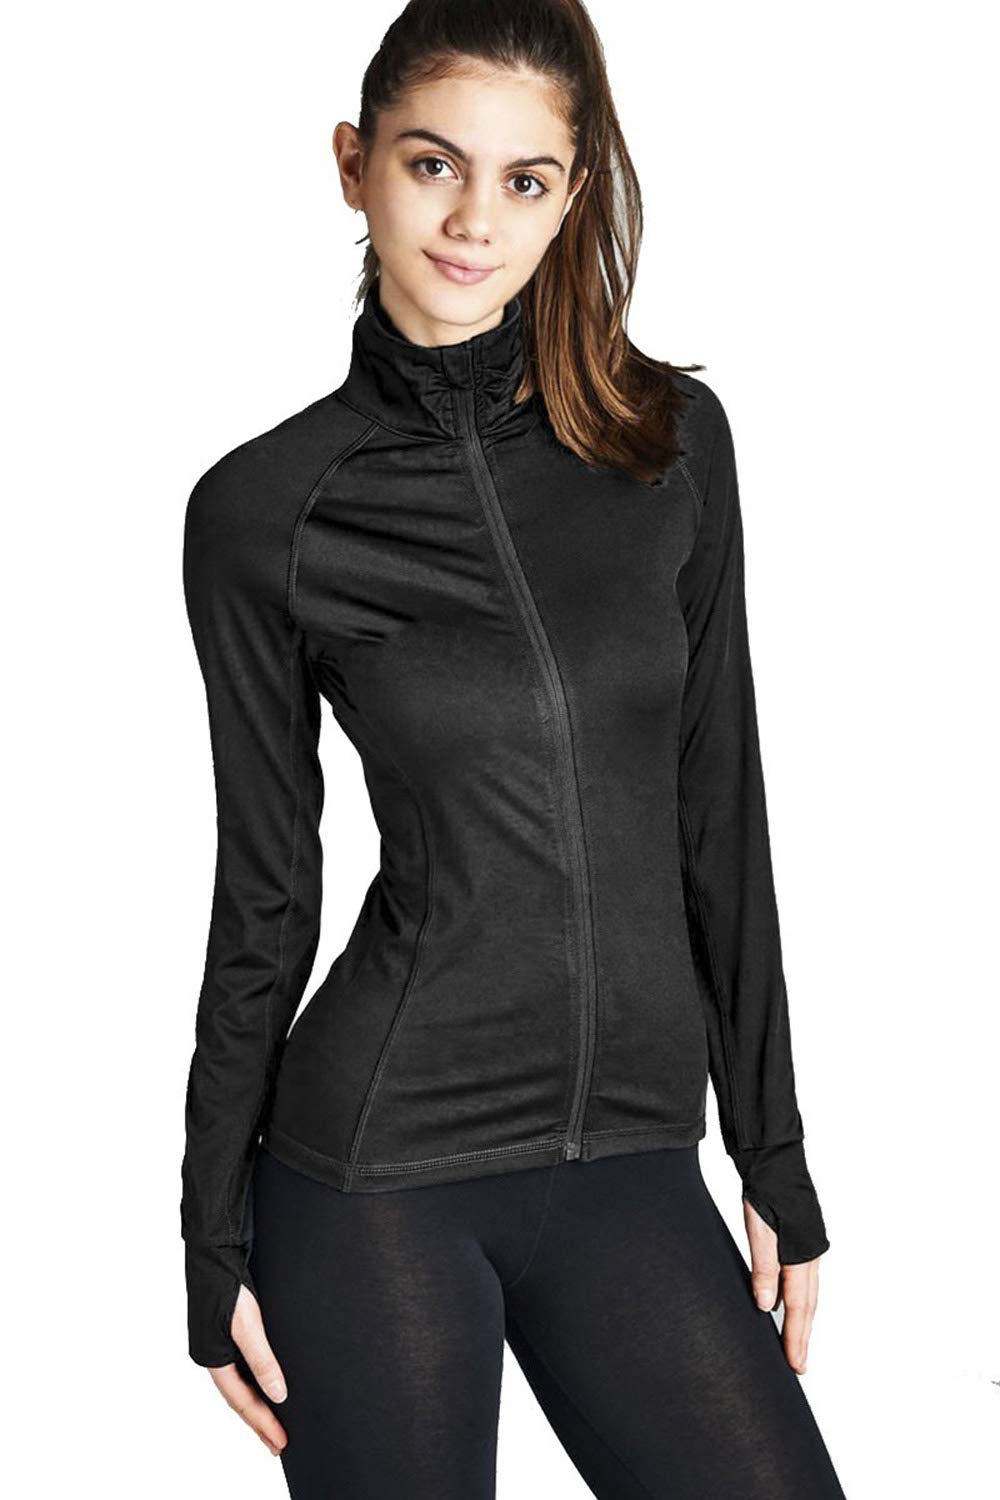 Women's Long Sleeve Zip up Athletic wear sweater Work Out Gym